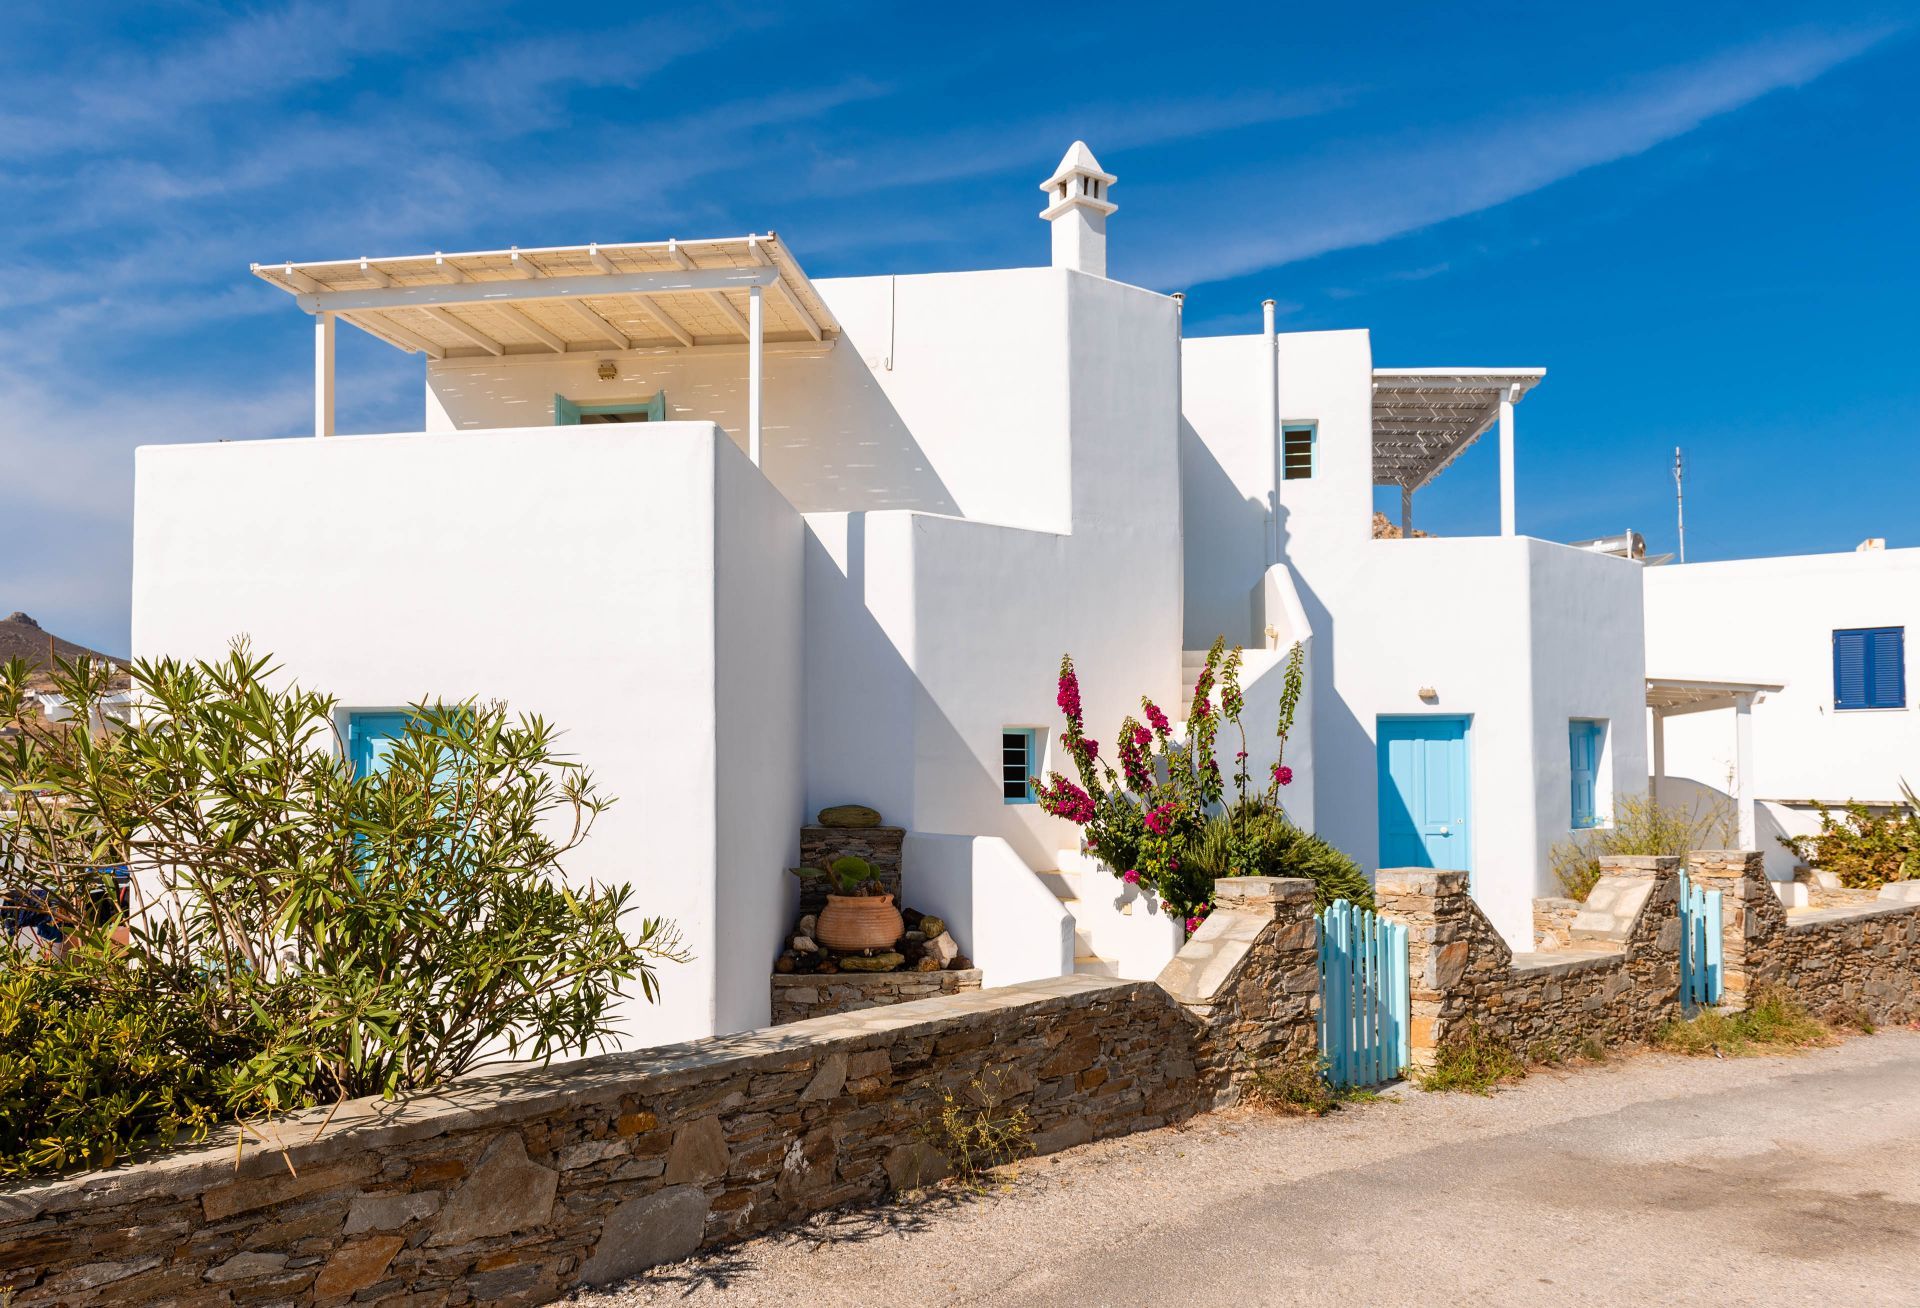 Cycladic hotel in Chora, the main village of Serifos